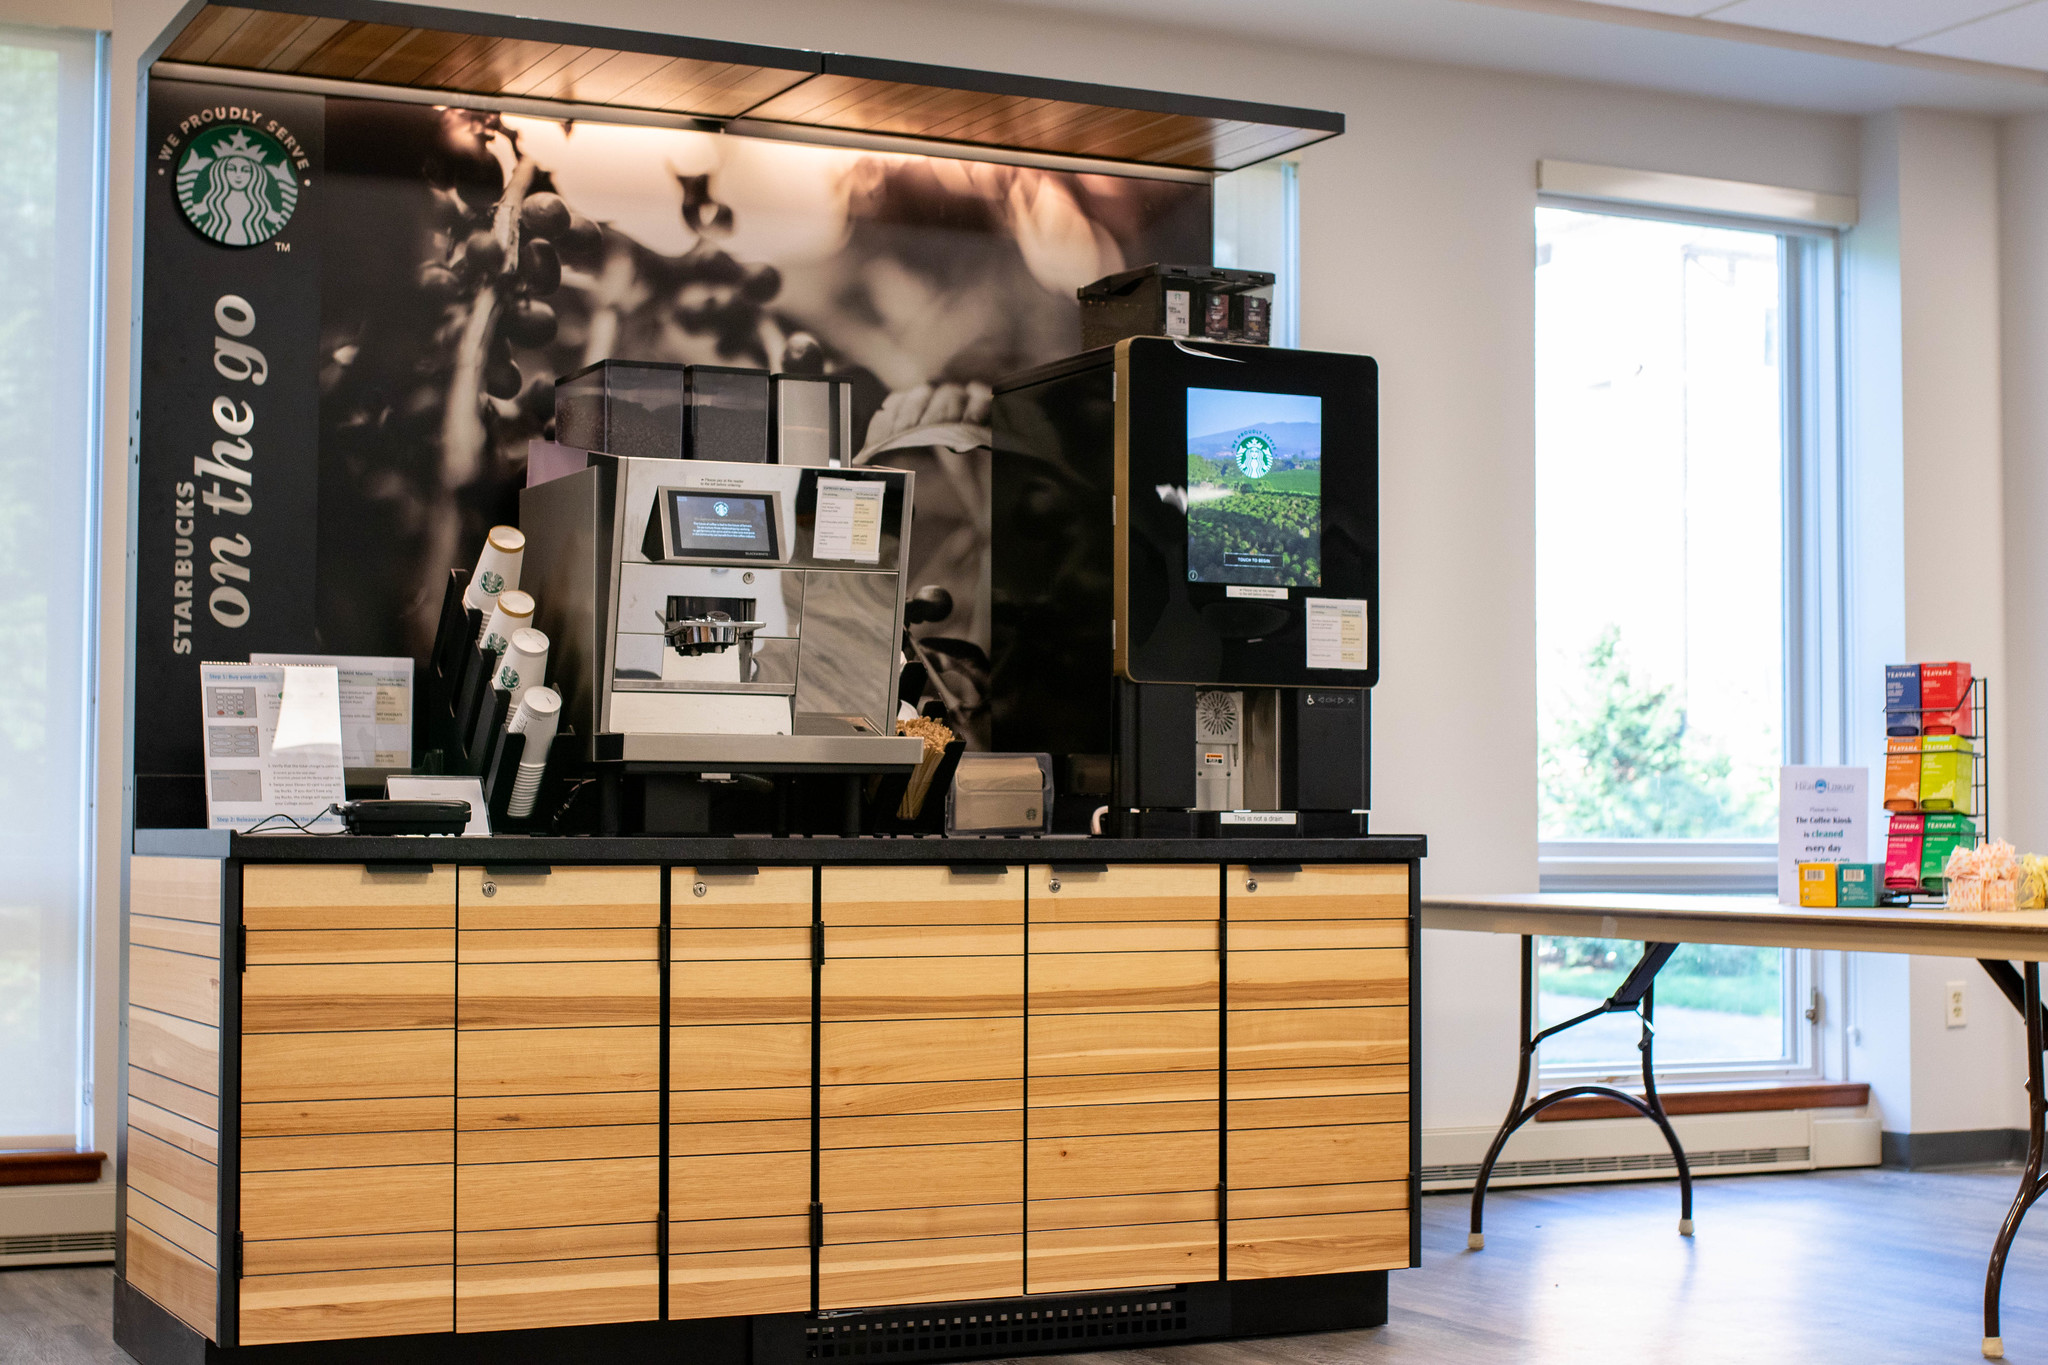 The Perfect Study-Buddy: Starbucks Coffee Kiosk Now Open at High Library